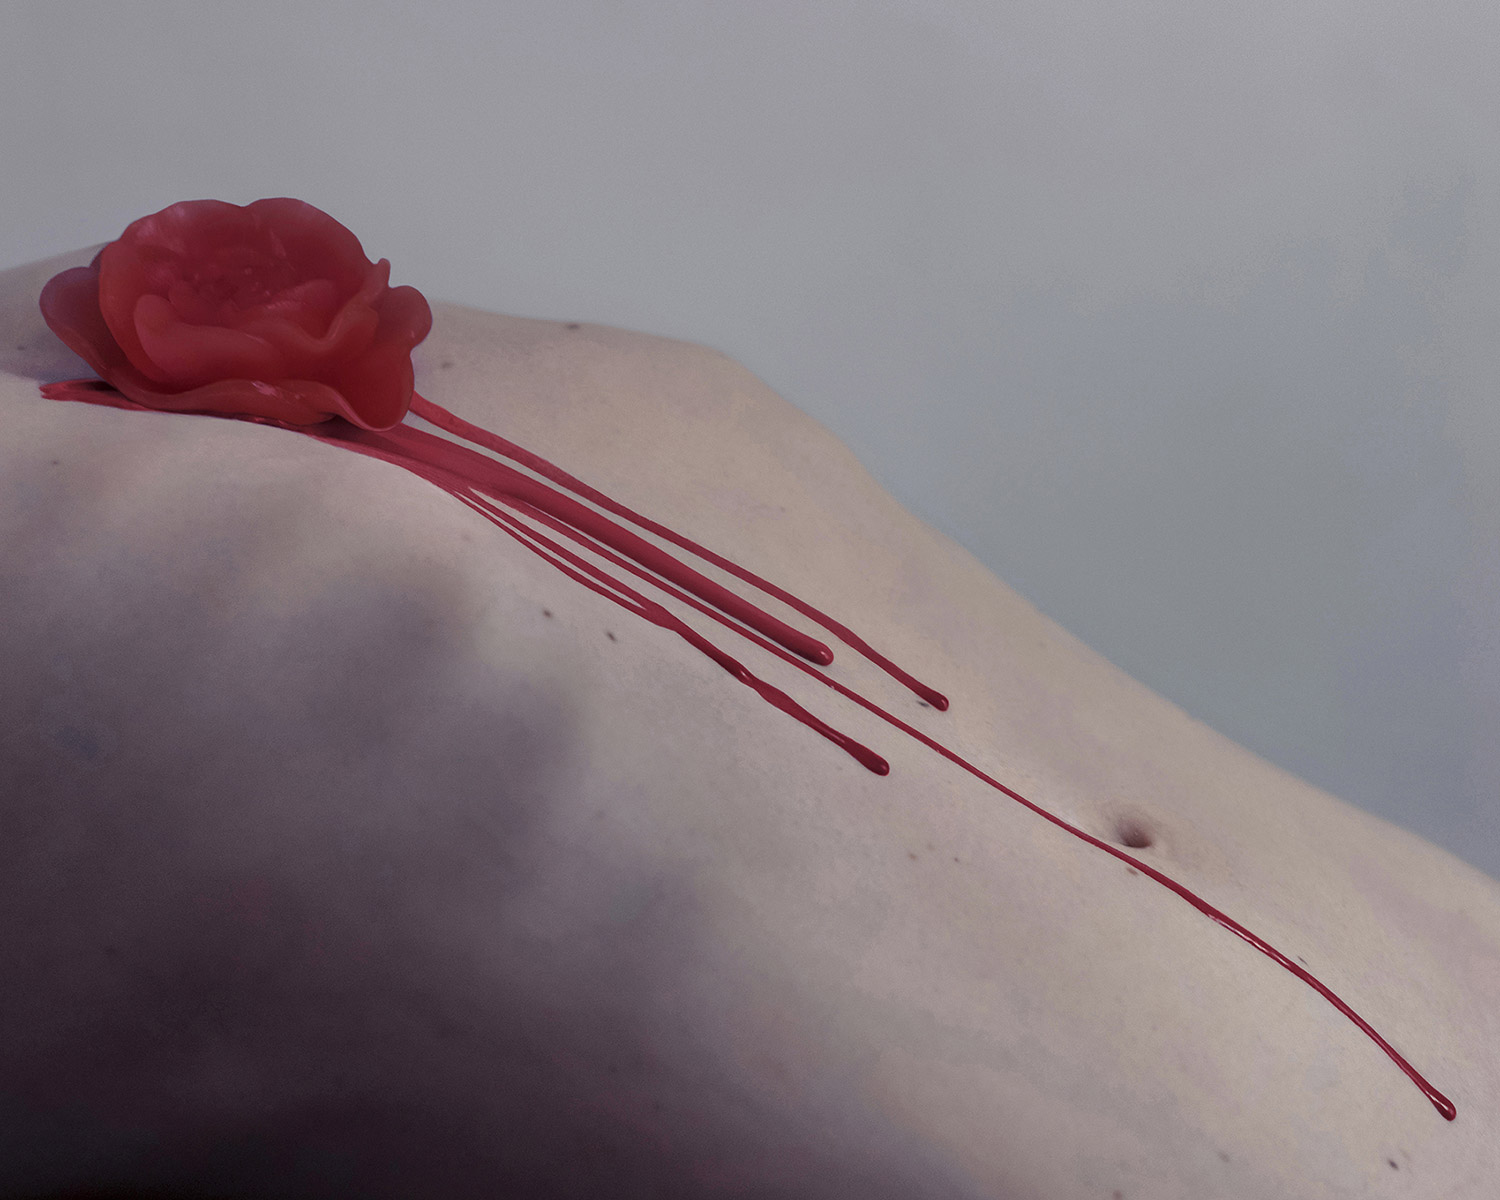 Brooke DiDonato, Roses - red rose on back